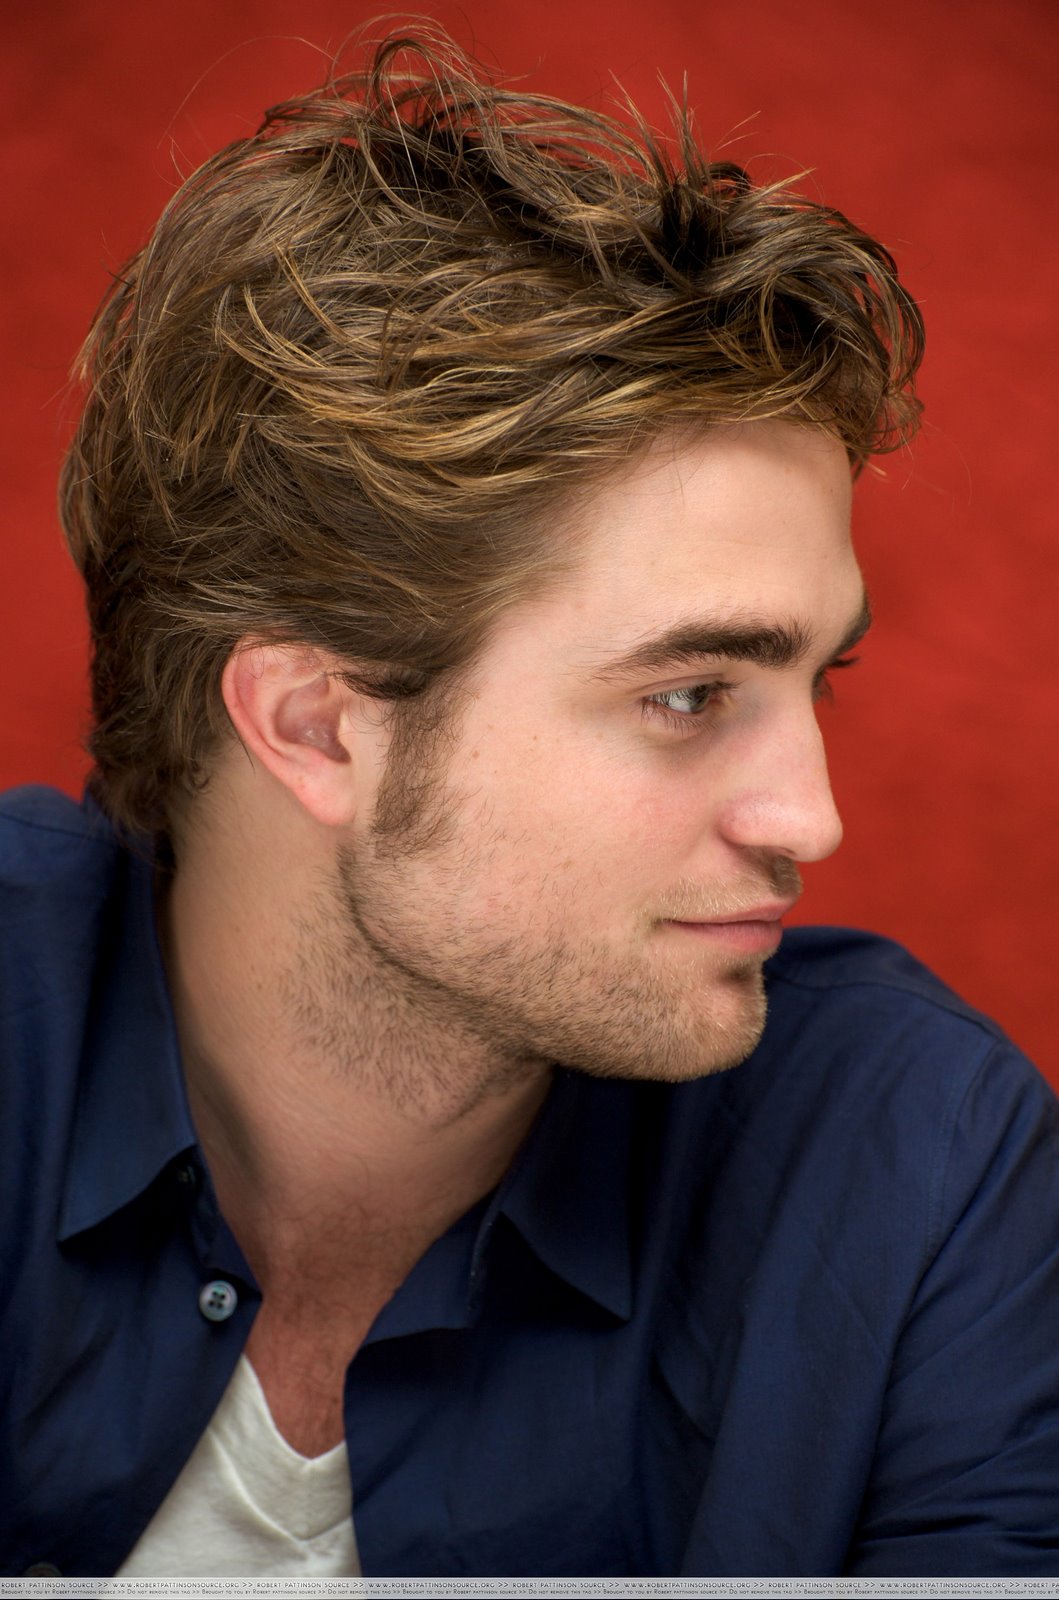 Robert Pattinson at the "Twilight" press conference at the Beverly Wilshire Hotel on November 8, 2008 in Beverly Hills, California.